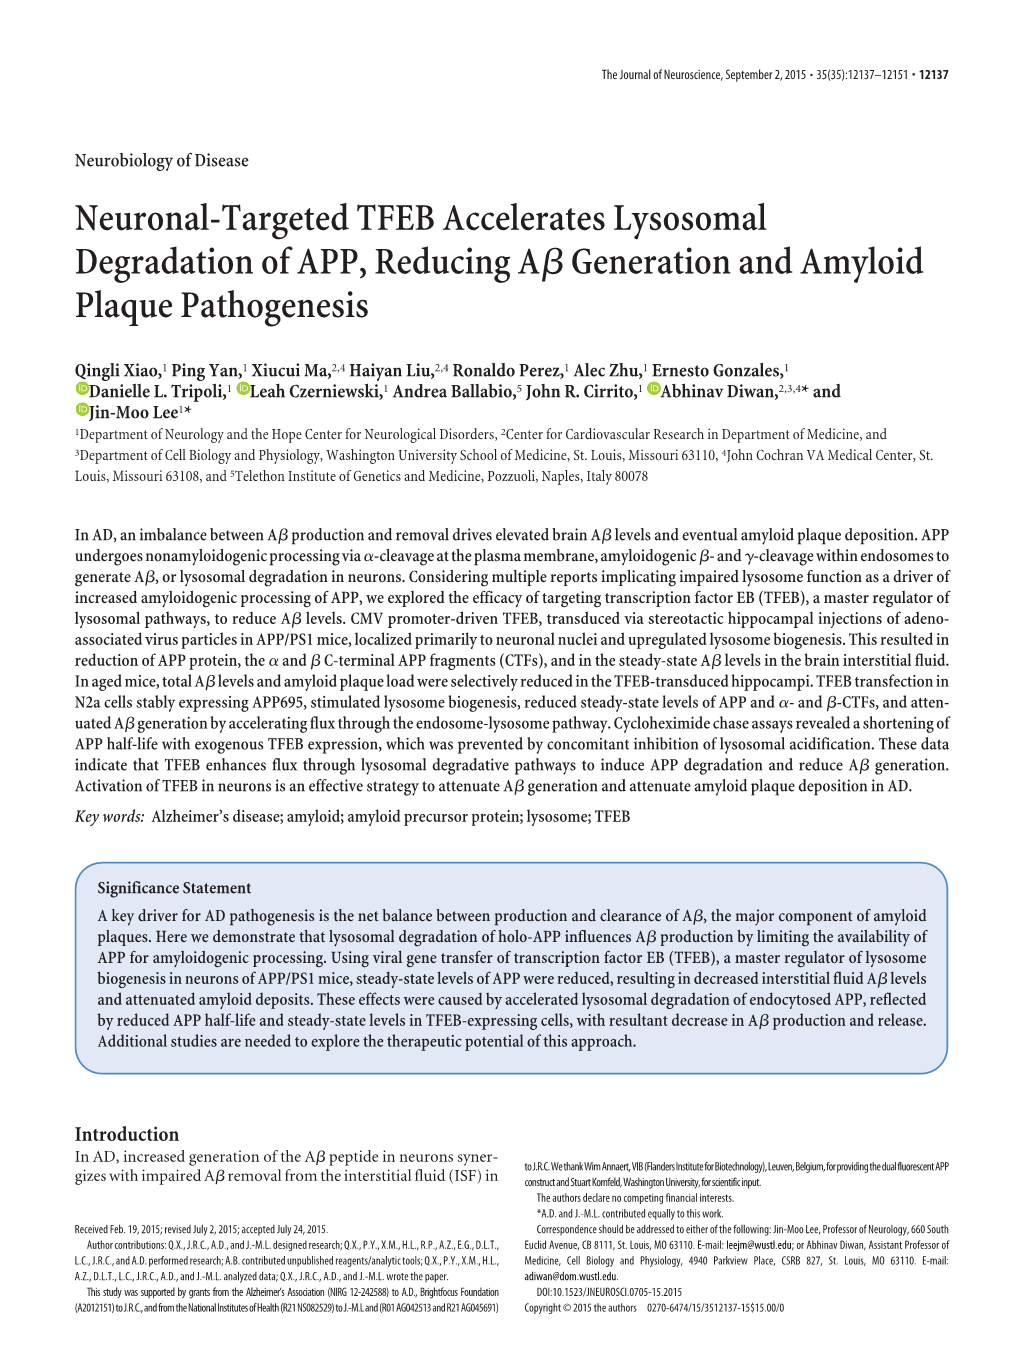 Neuronal-Targeted TFEB Accelerates Lysosomal Degradation of APP, Reducing A␤ Generation and Amyloid Plaque Pathogenesis